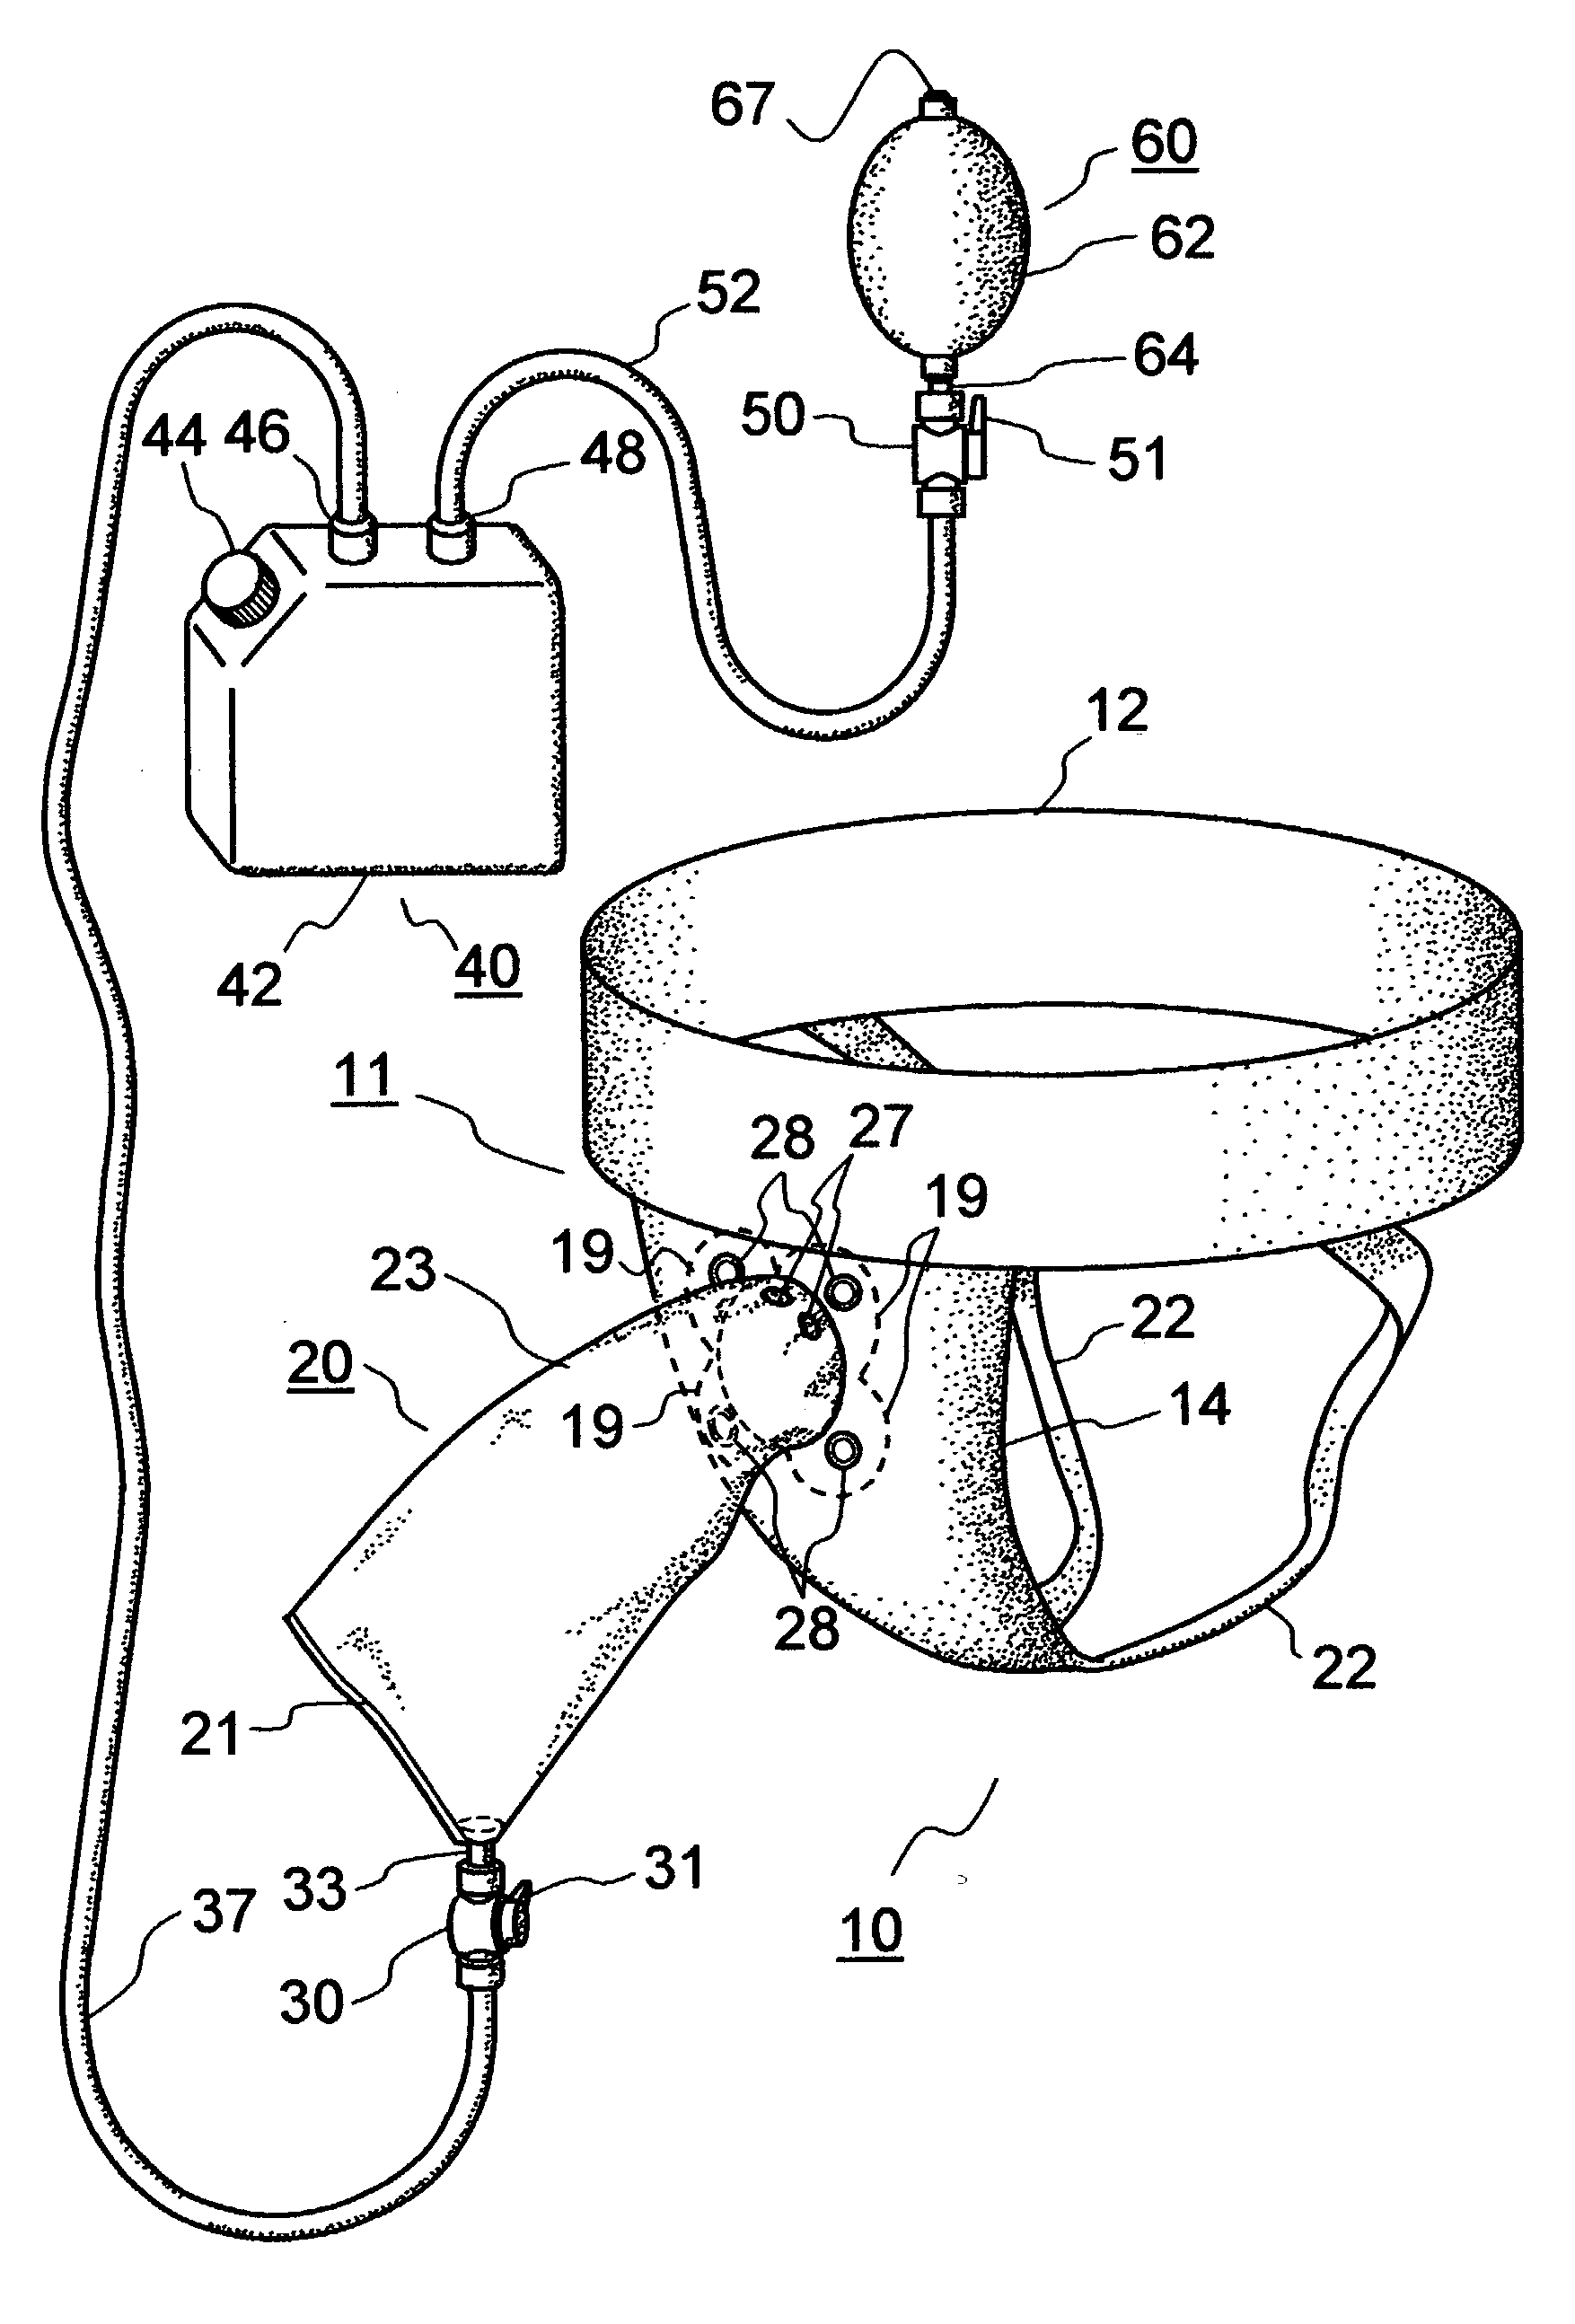 Urine collection system for males utilizing a flexible external catheter and vacuum assistance